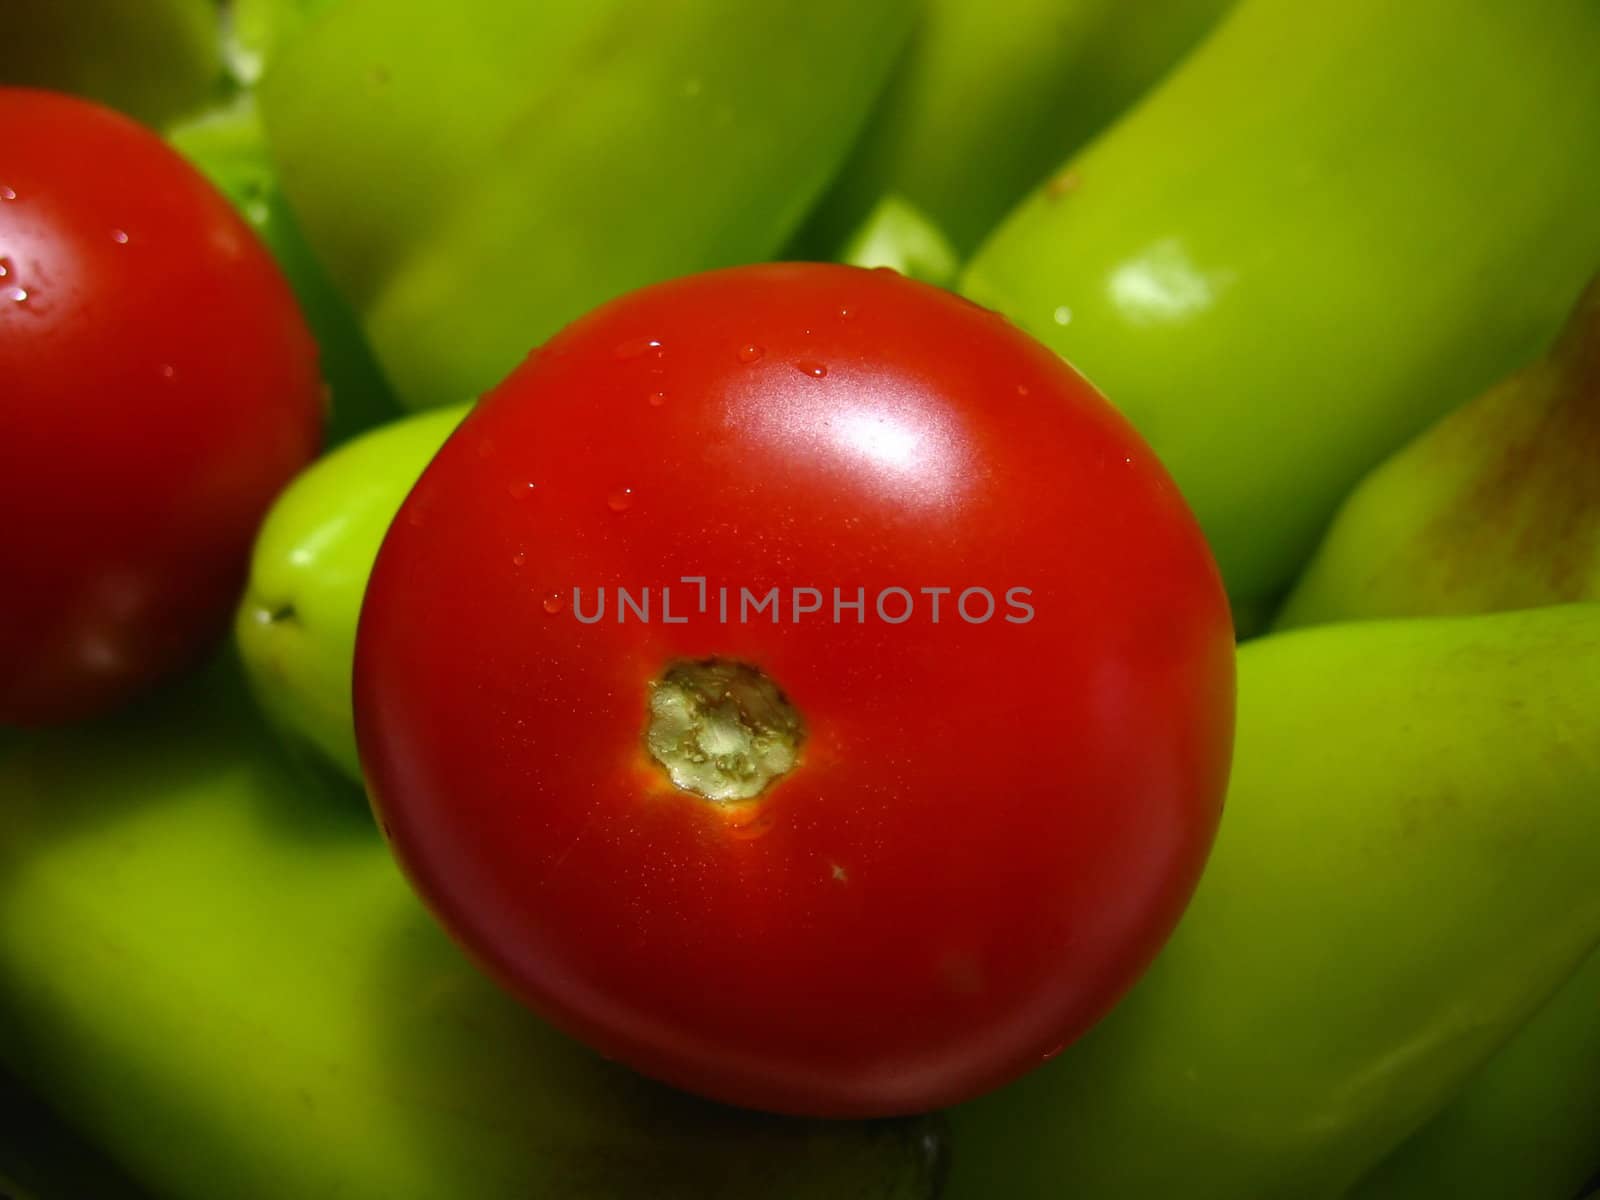 Red tomato on a background of green peppers 